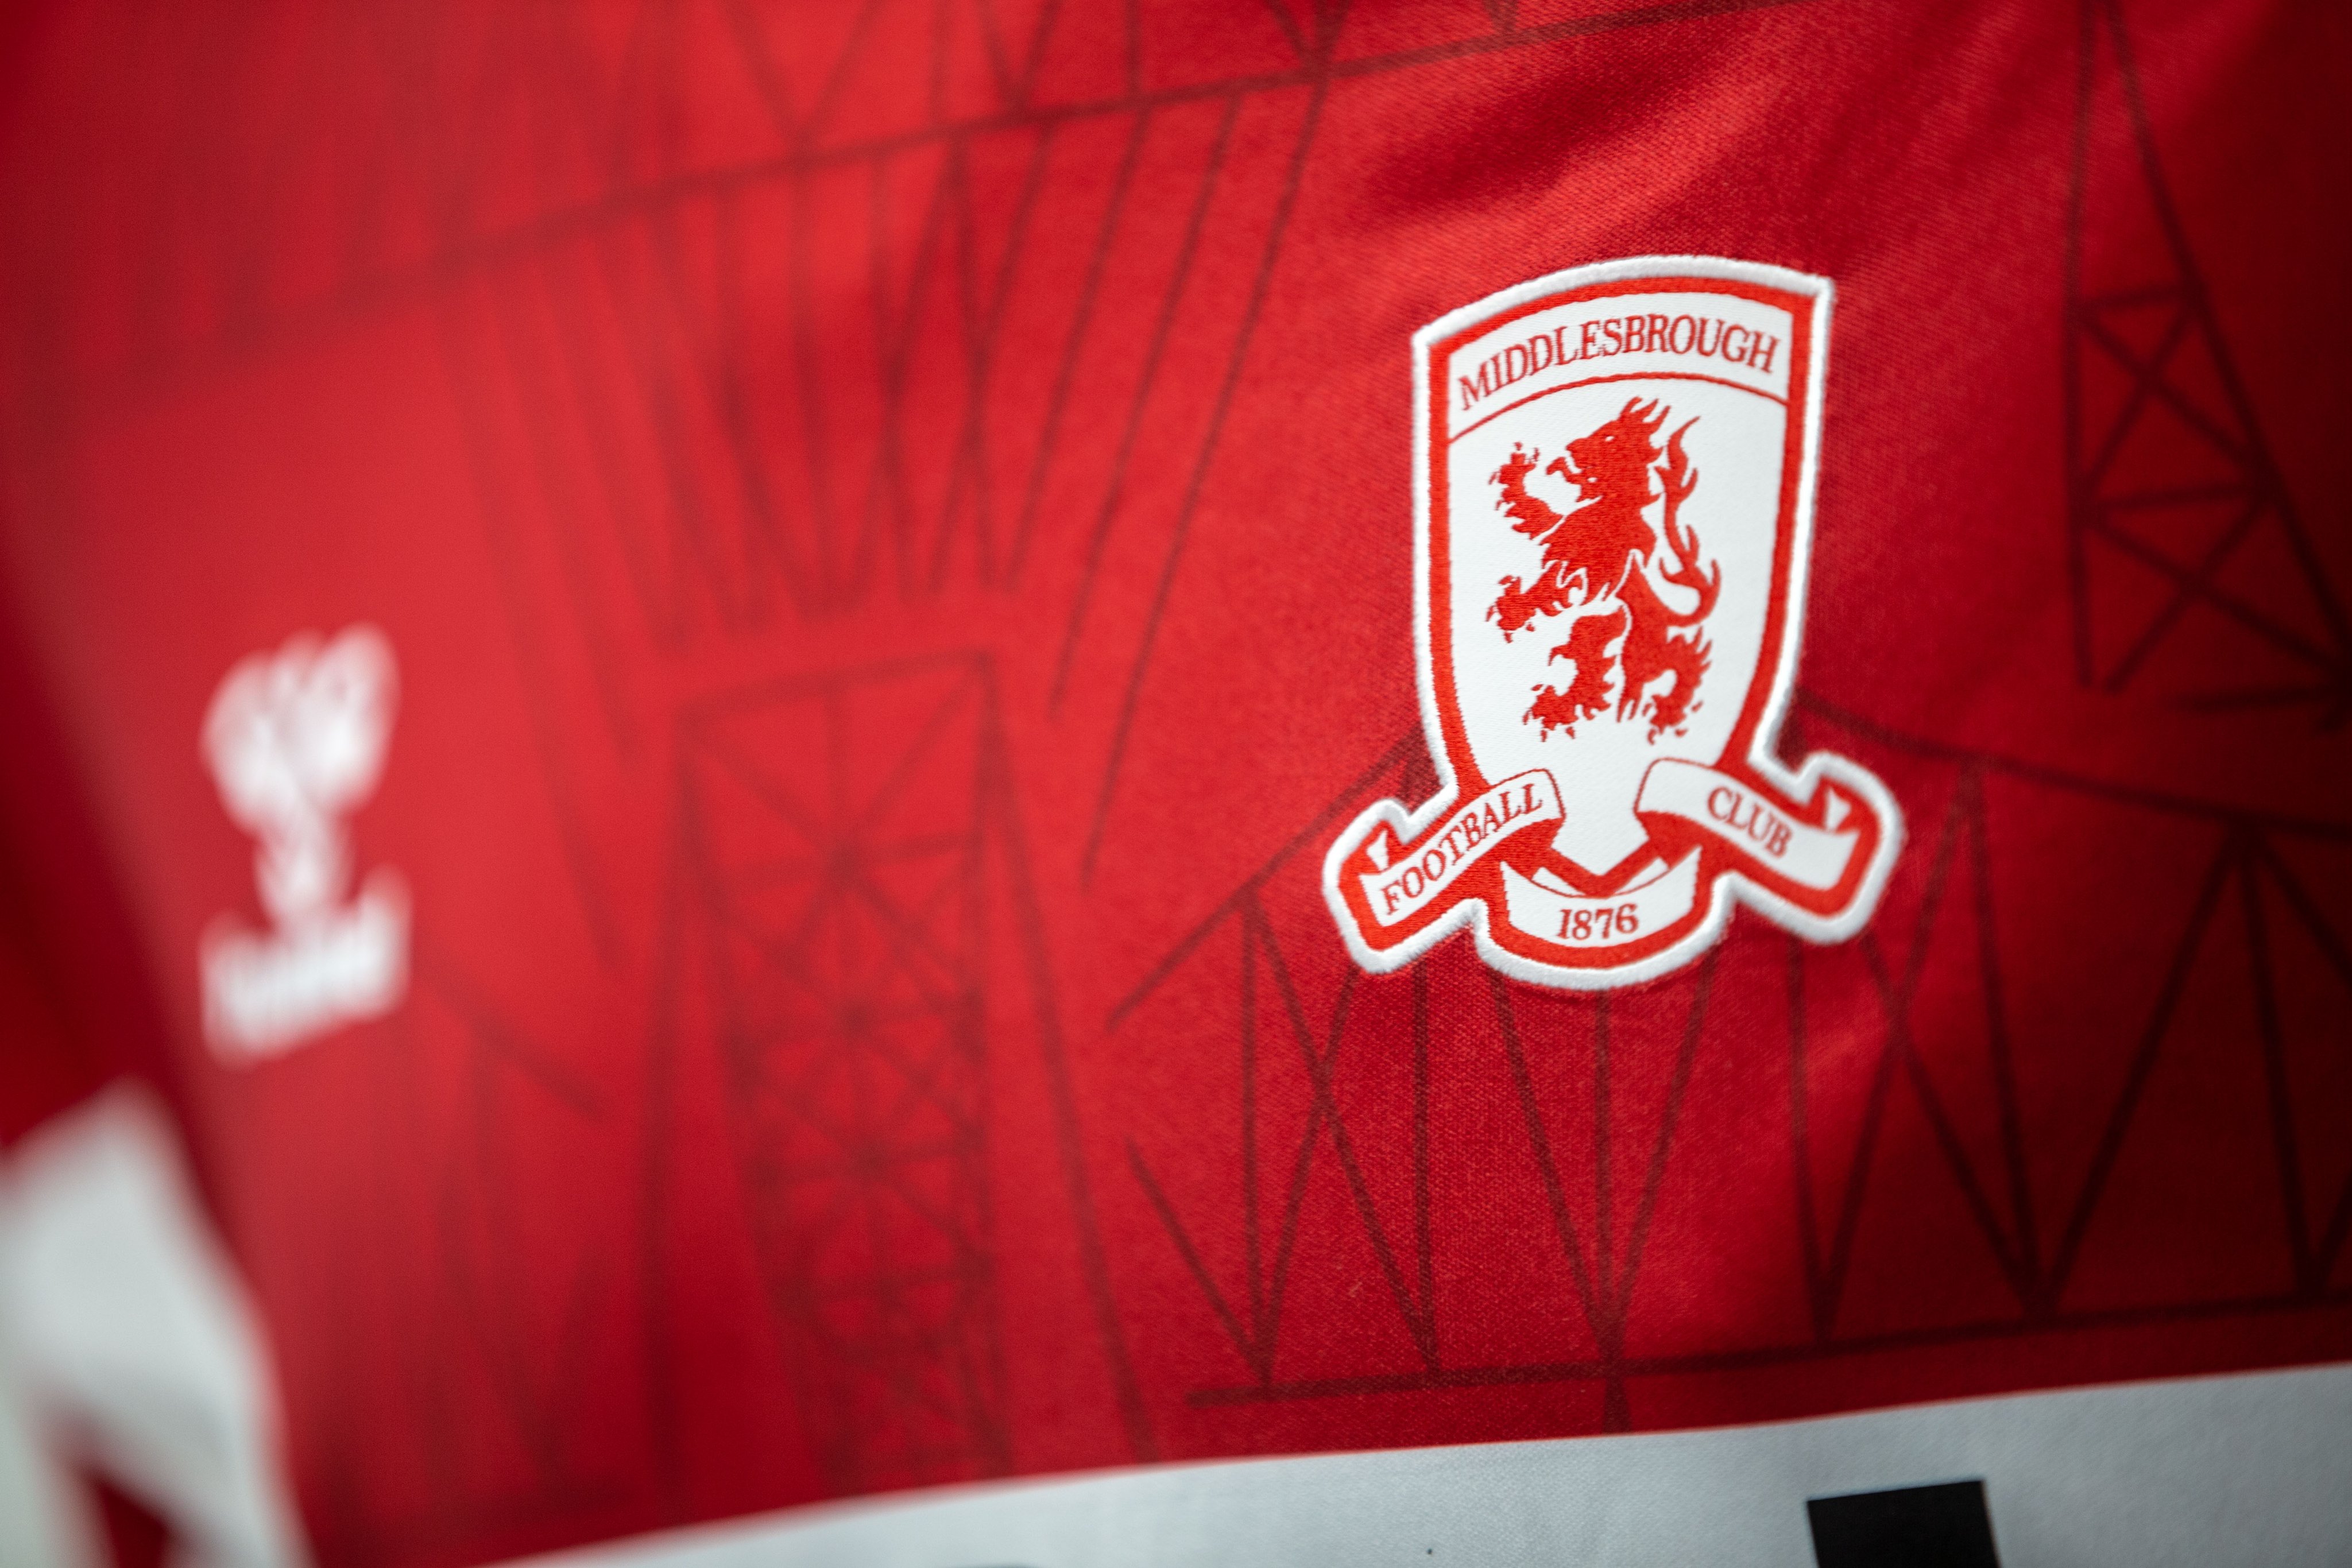 Middlesbrough FC about having pride of place on #Boro's home shirts this season?